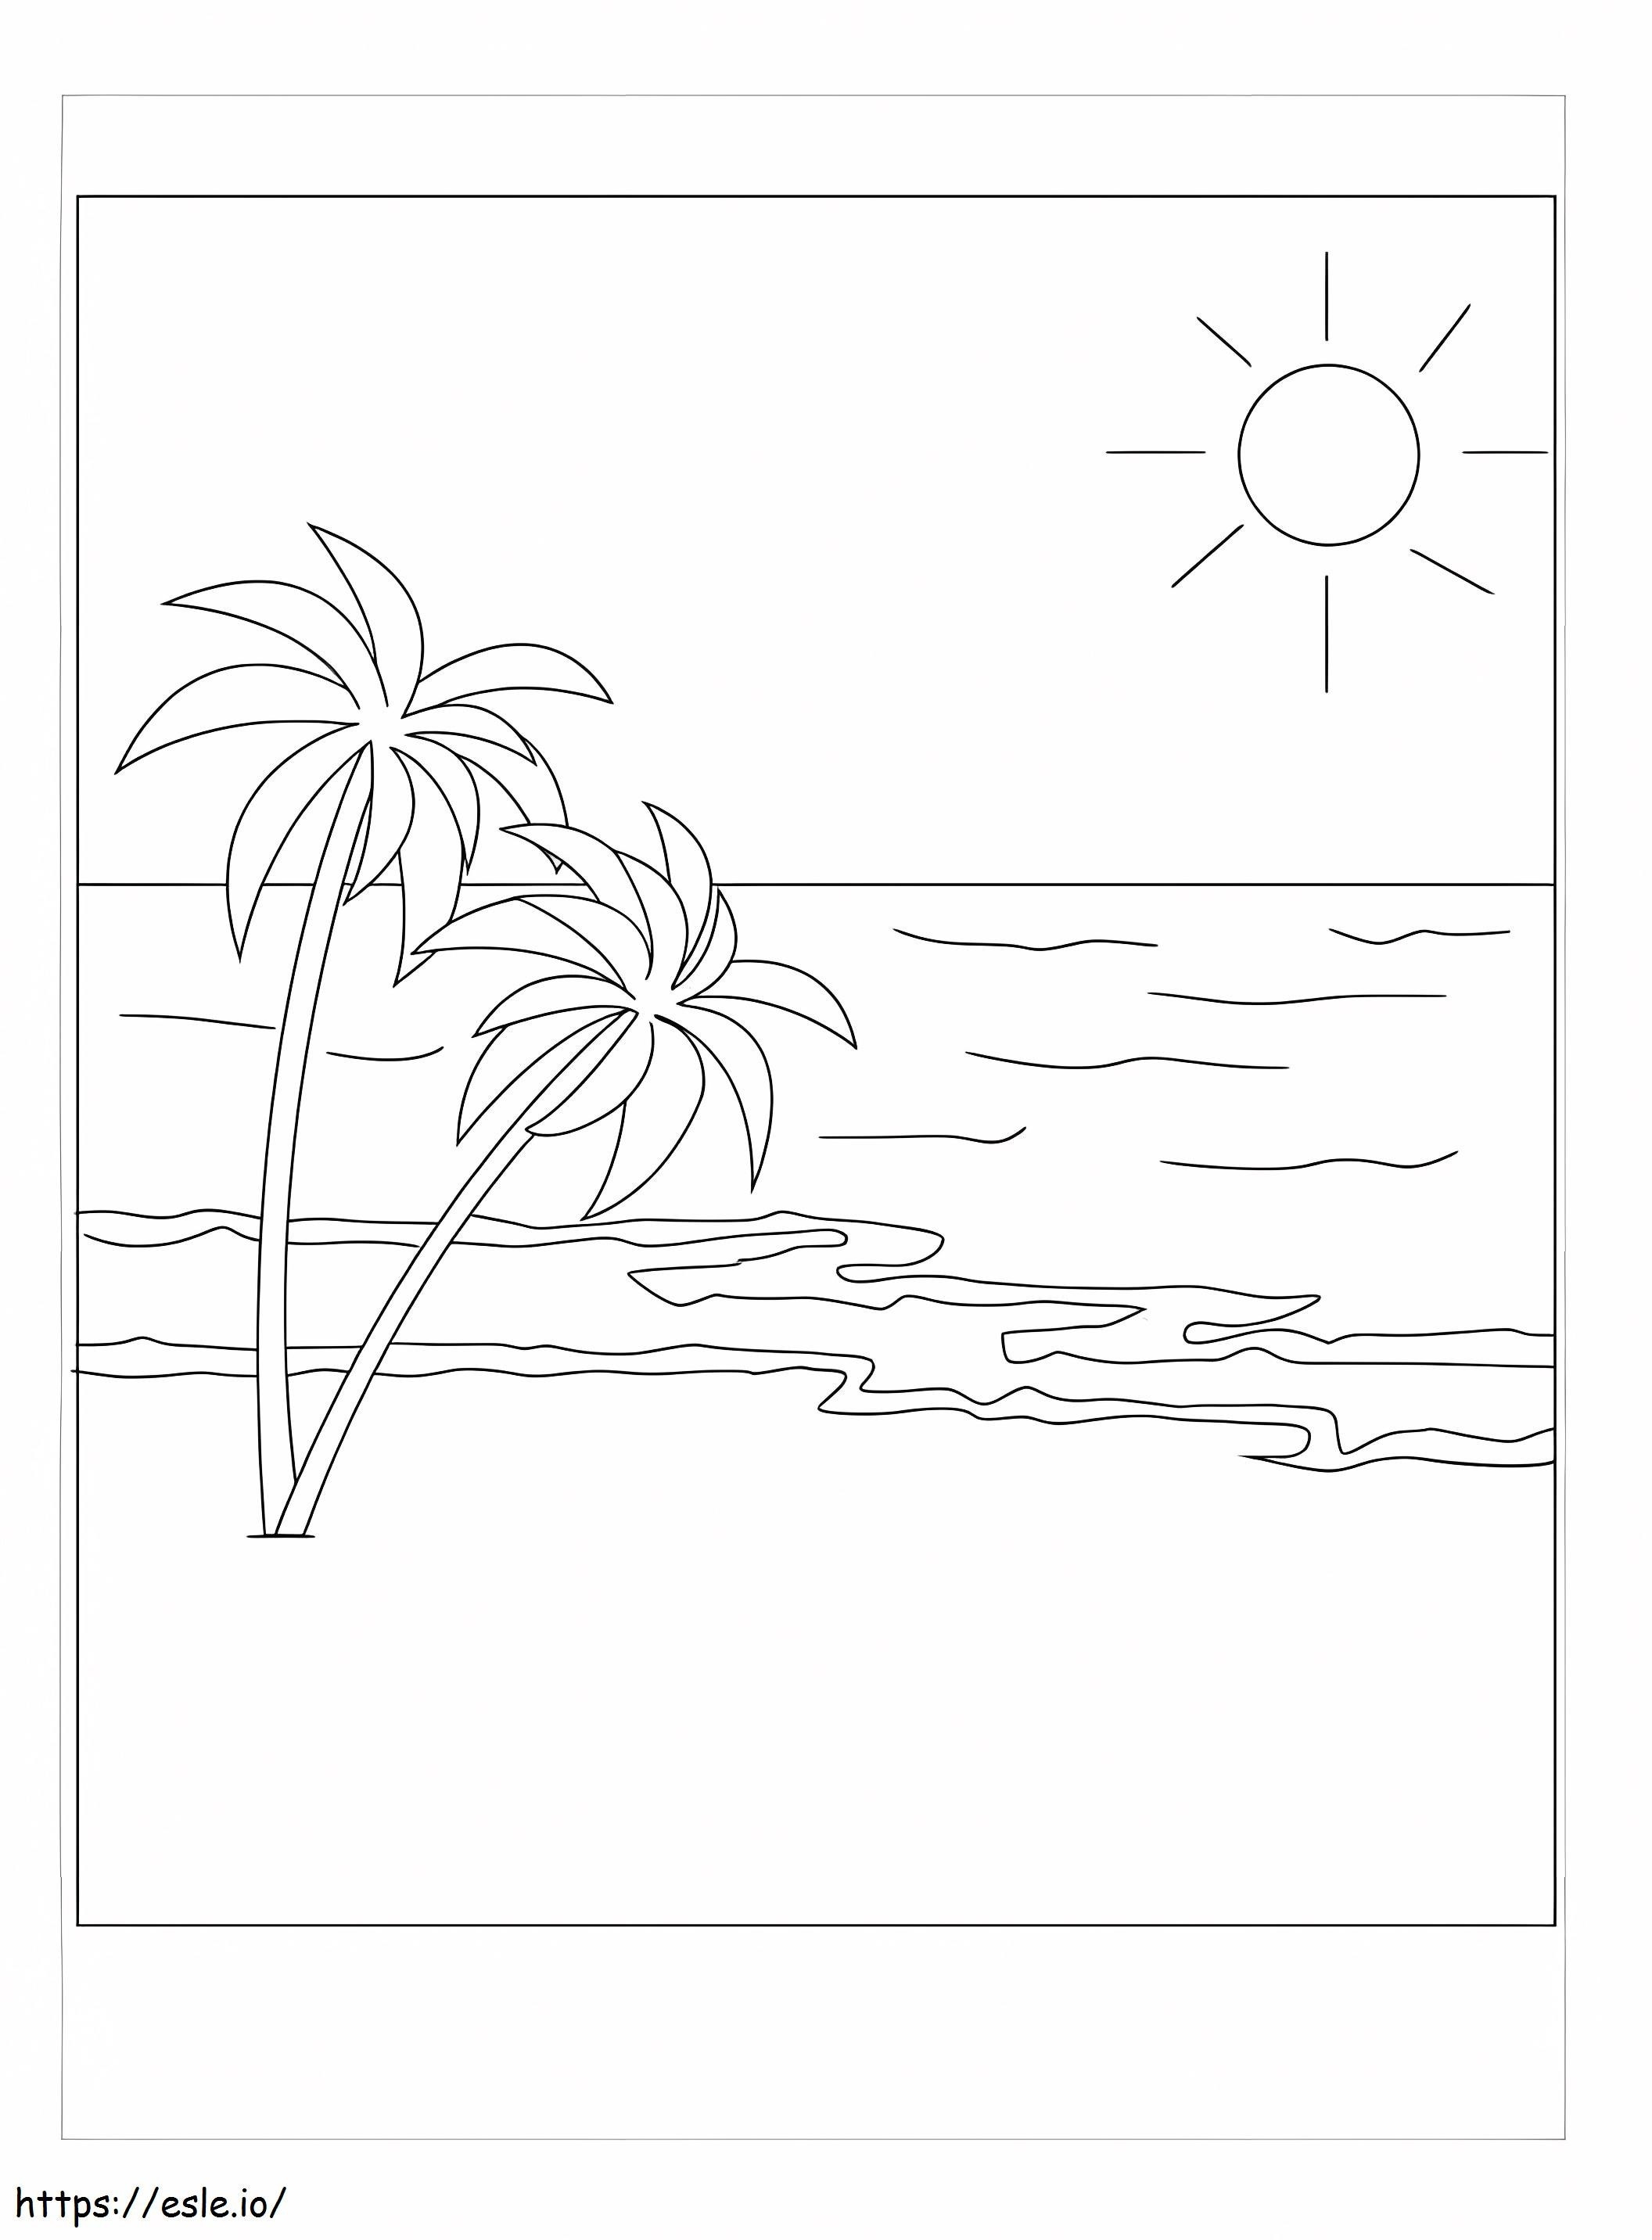 Coconut Tree On The Beach coloring page